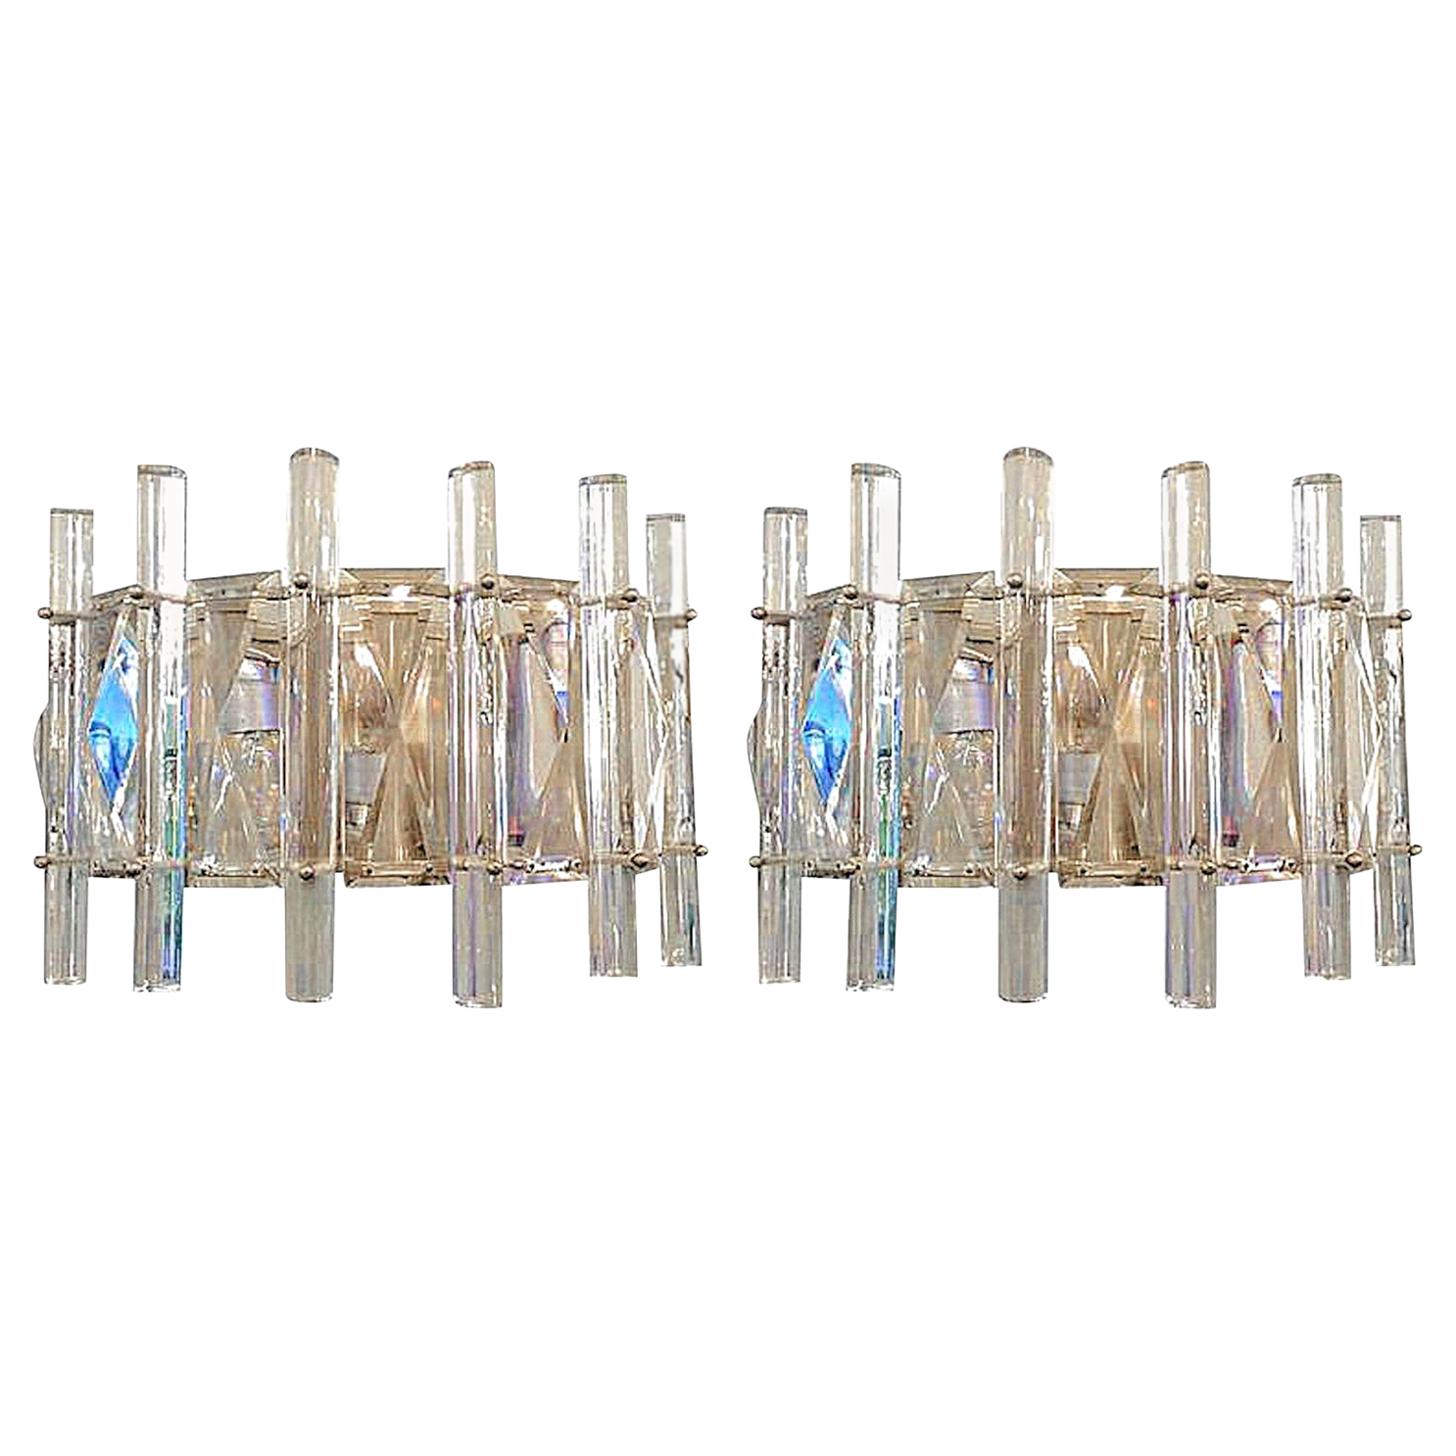 Pair of Mid-Century Modern French half moon shaped, cut crystal and chrome-plated sconces.
This lovely pair of sconces looks straight out of the 